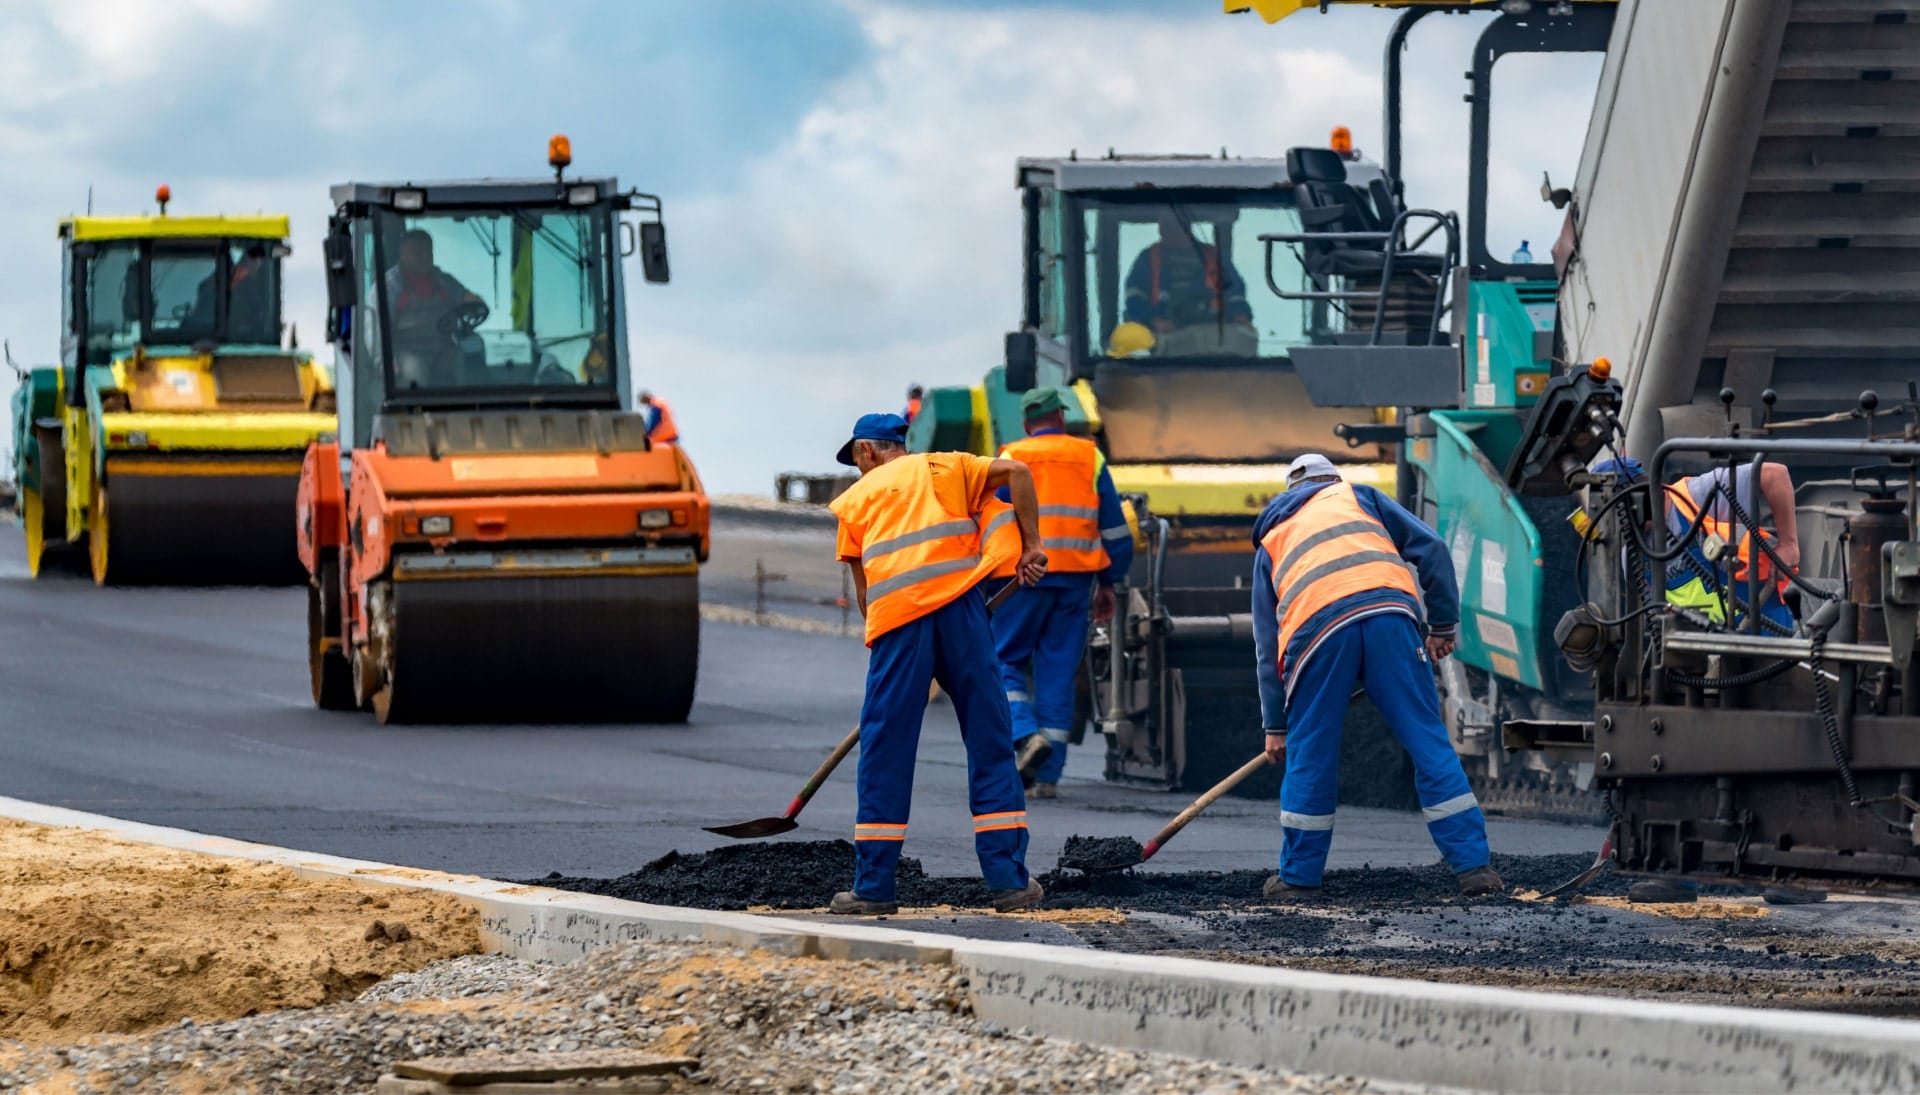 A group of construction workers wearing hard hats and reflective vests, operating heavy machinery and laying down asphalt on a newly excavated road in Durham, showcasing the intricate process of building a sturdy and smooth surface.